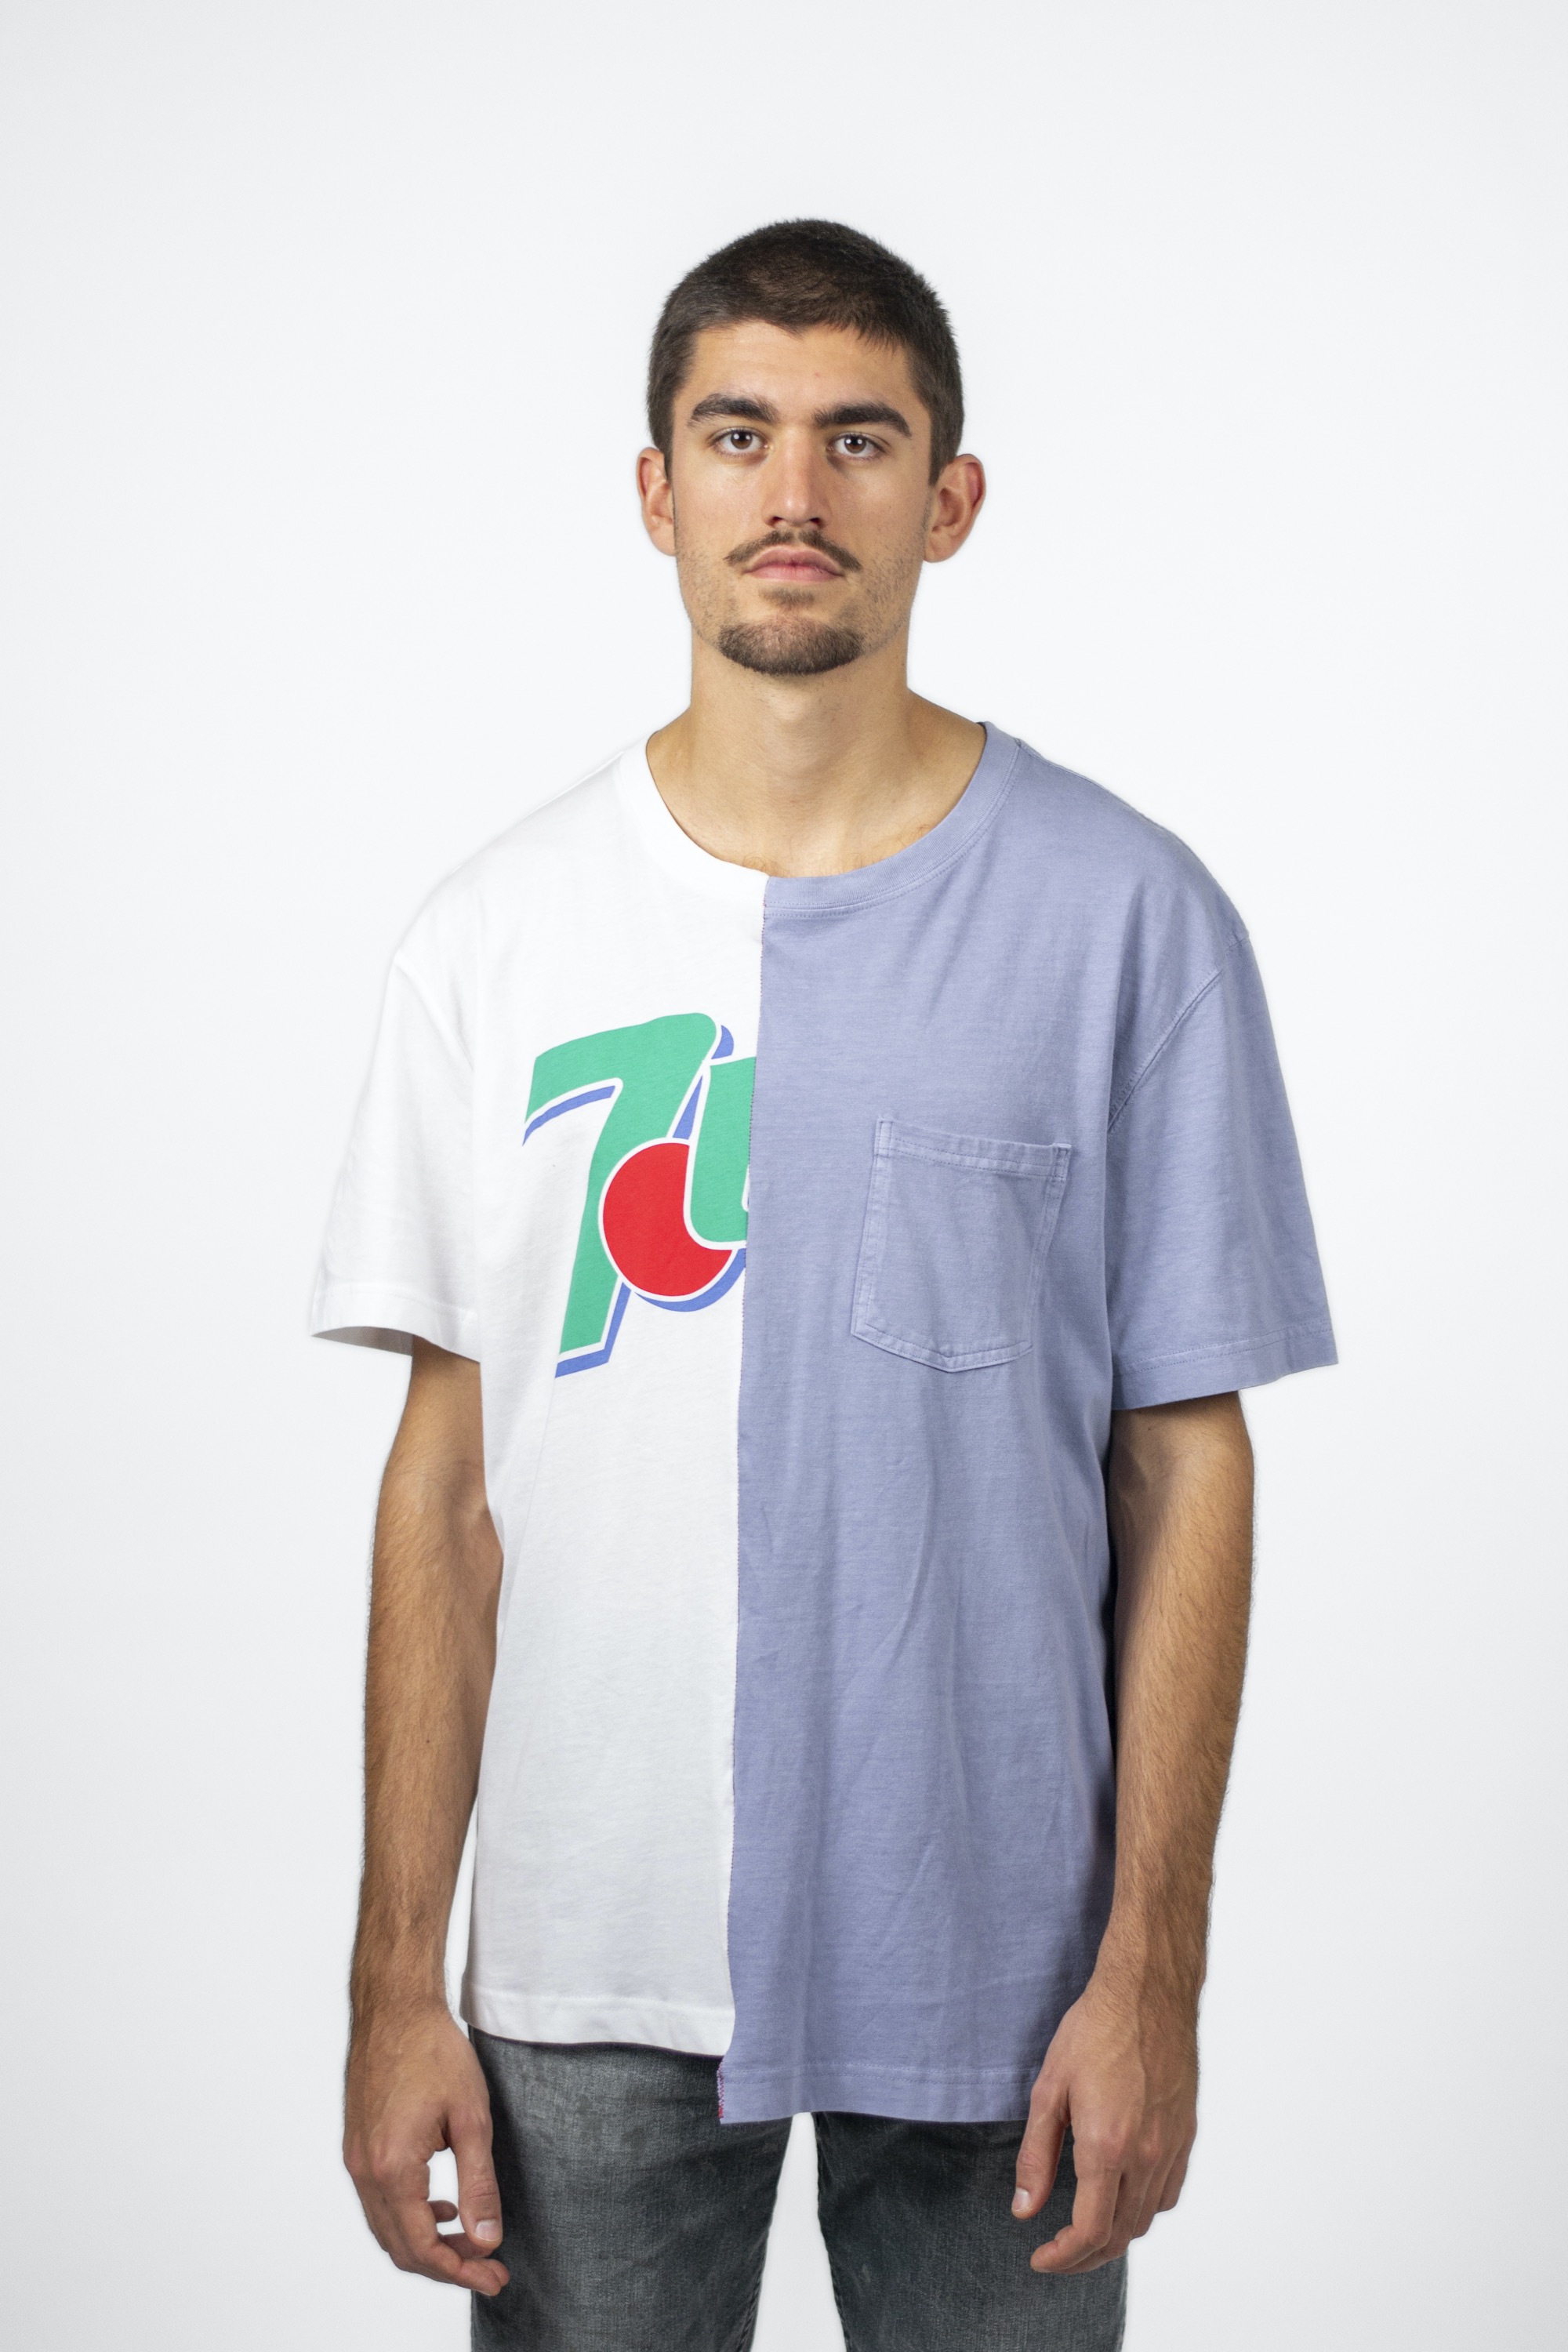 A model wearing repaired t-shirt